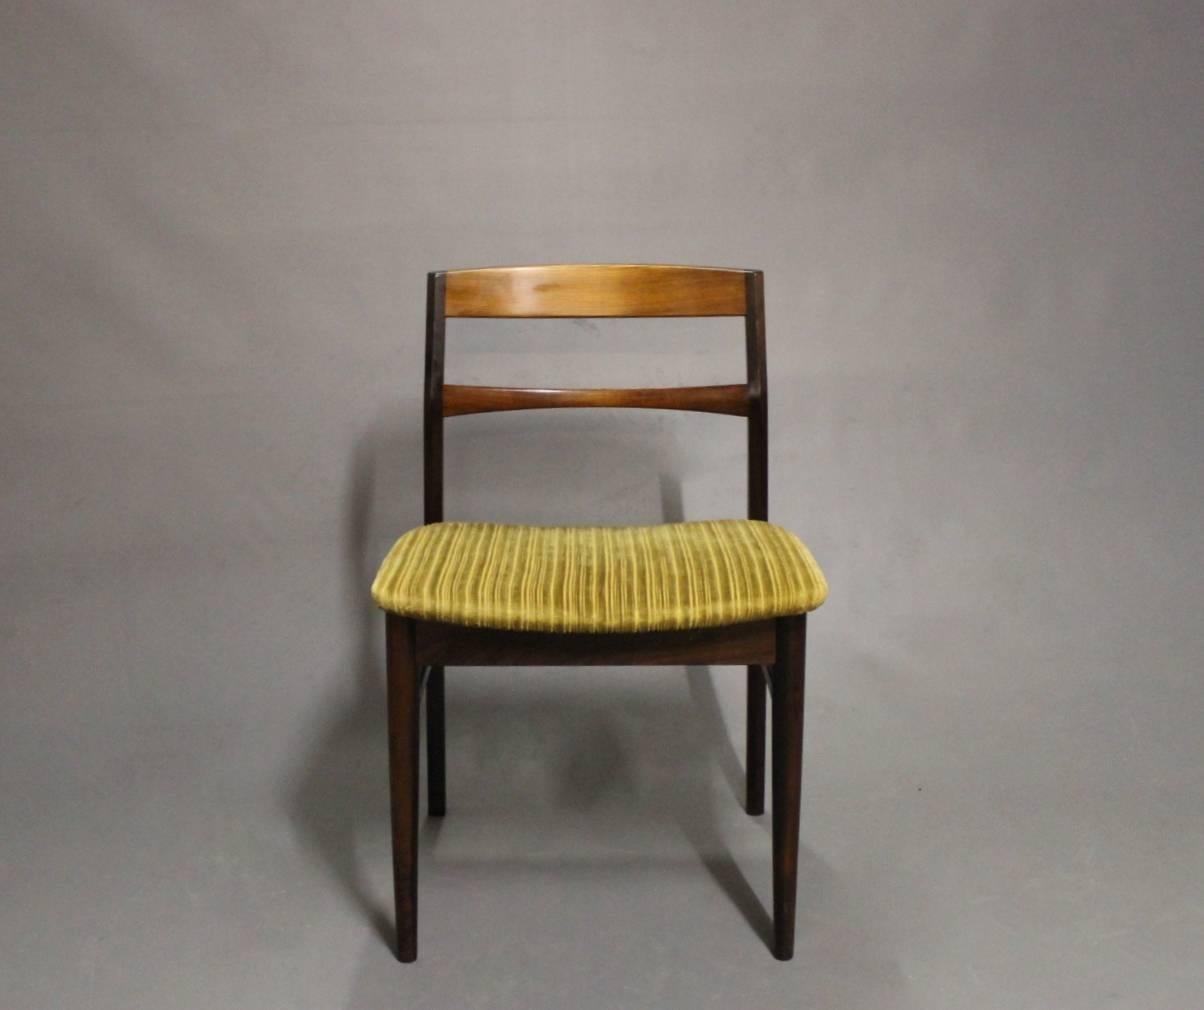 A set of four dining room chairs designed by Arne Vodder and manufactured in rosewood with light fabric from the 1960s is a remarkable representation of mid-century modern design that seamlessly combines organic materials and functional